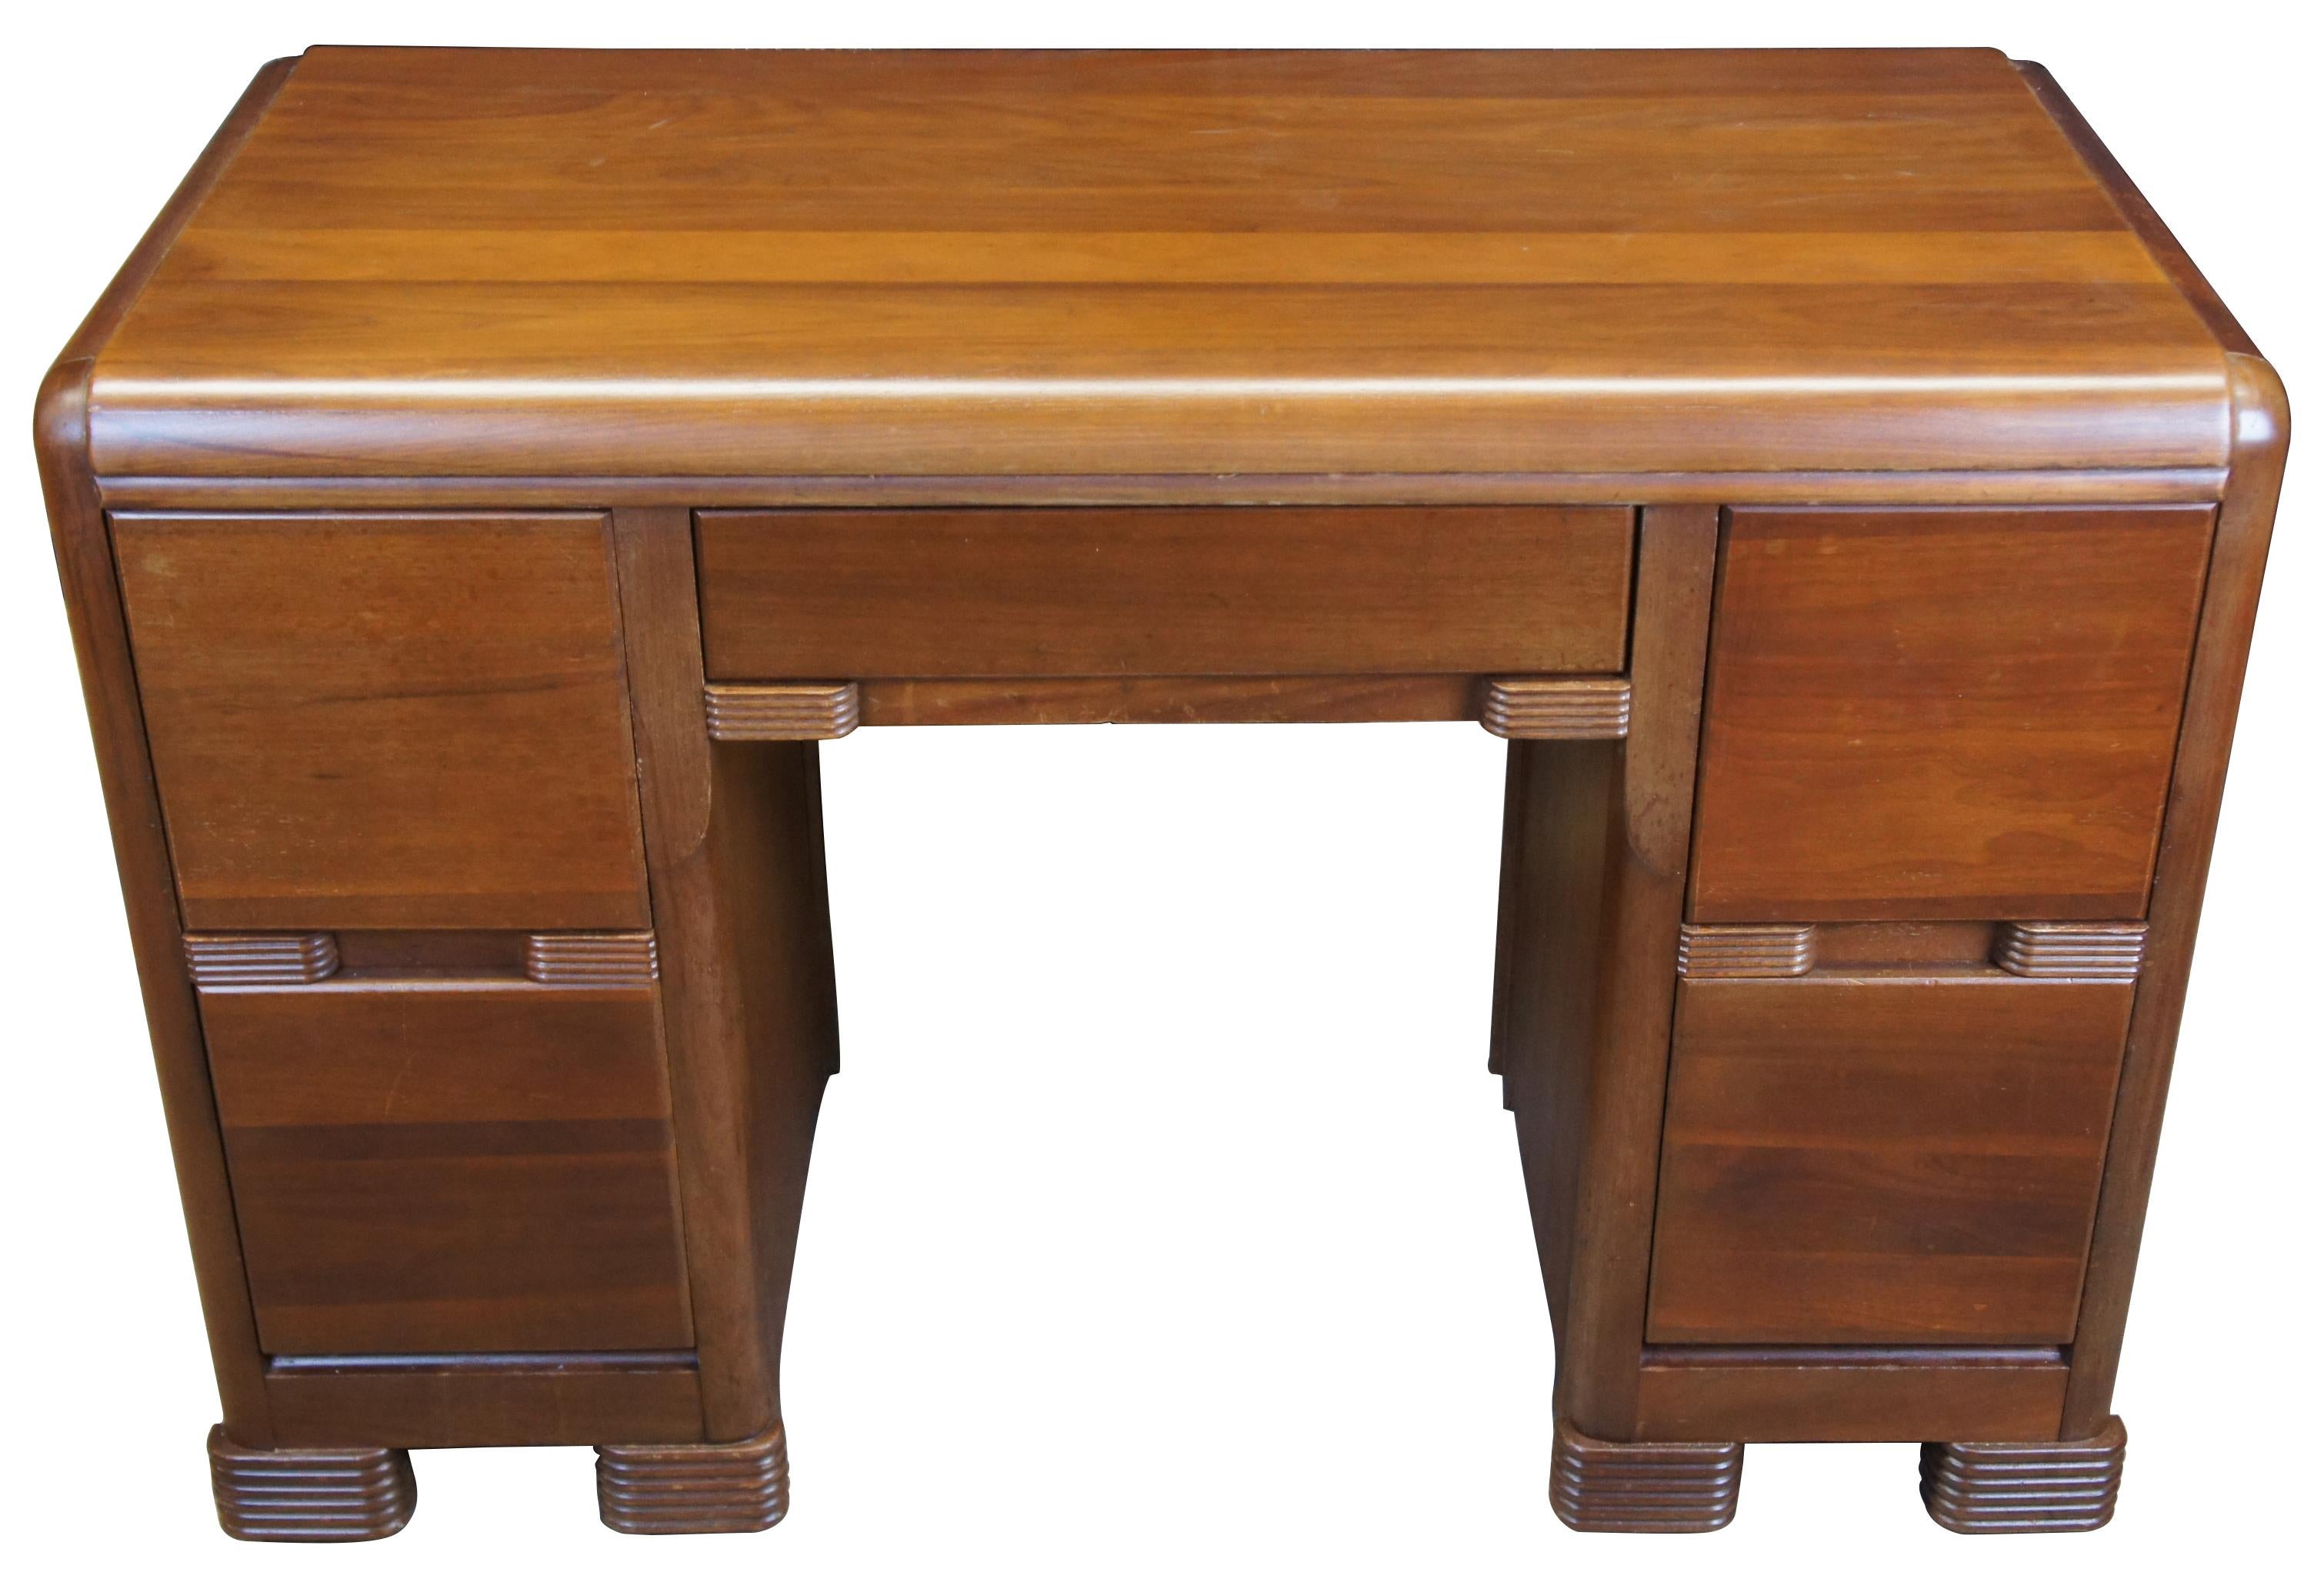 Art Deco era American walnut writing desk. Features the iconic waterfall front with four large drawers flanking a kneehole and upper pencil drawer, circa 1940s.
  